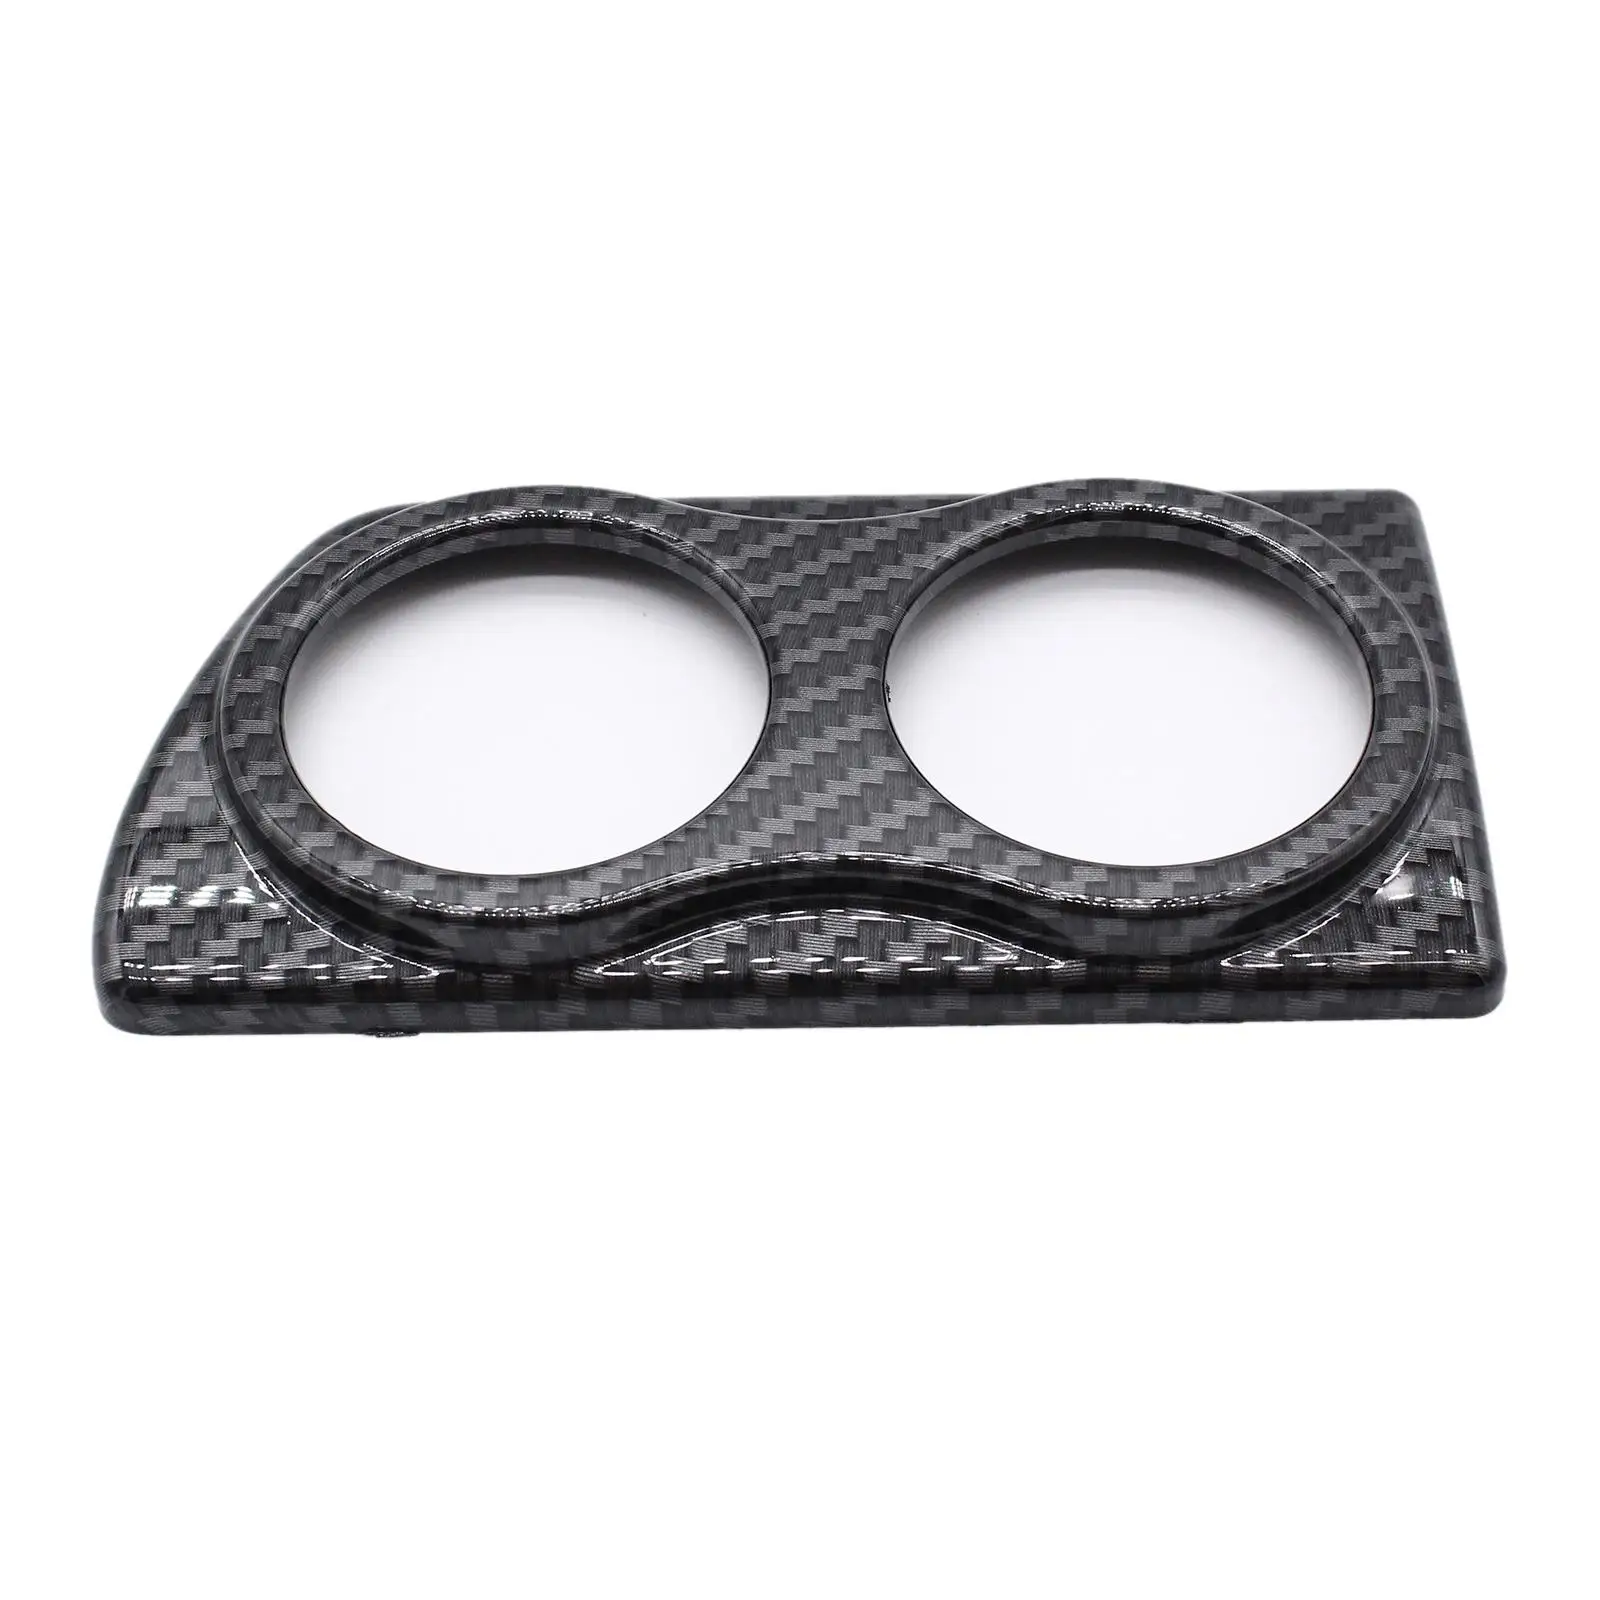 Automotive    Pod, Durable Dashboard Cover for Vauxhall H MK5  Replacement